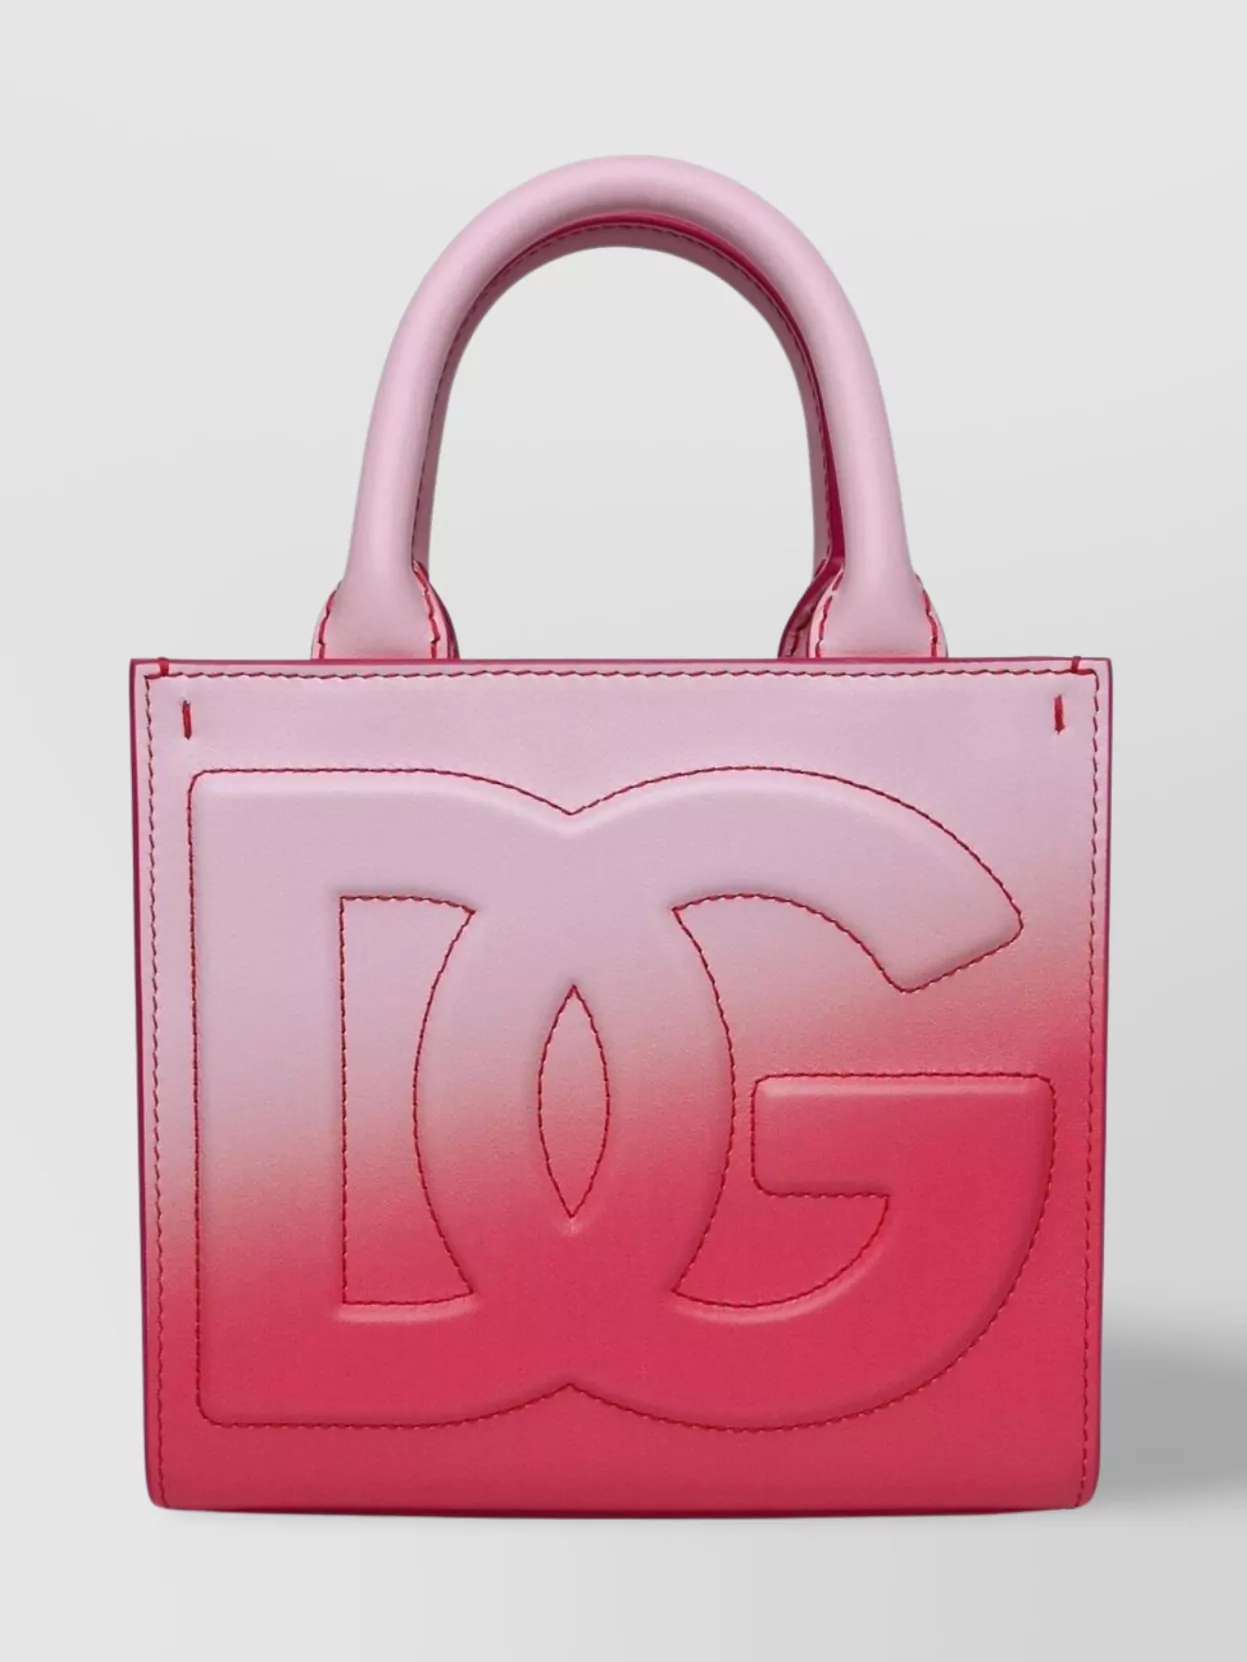 Dolce & Gabbana Tote Bag Leather Gradient Design In Pink